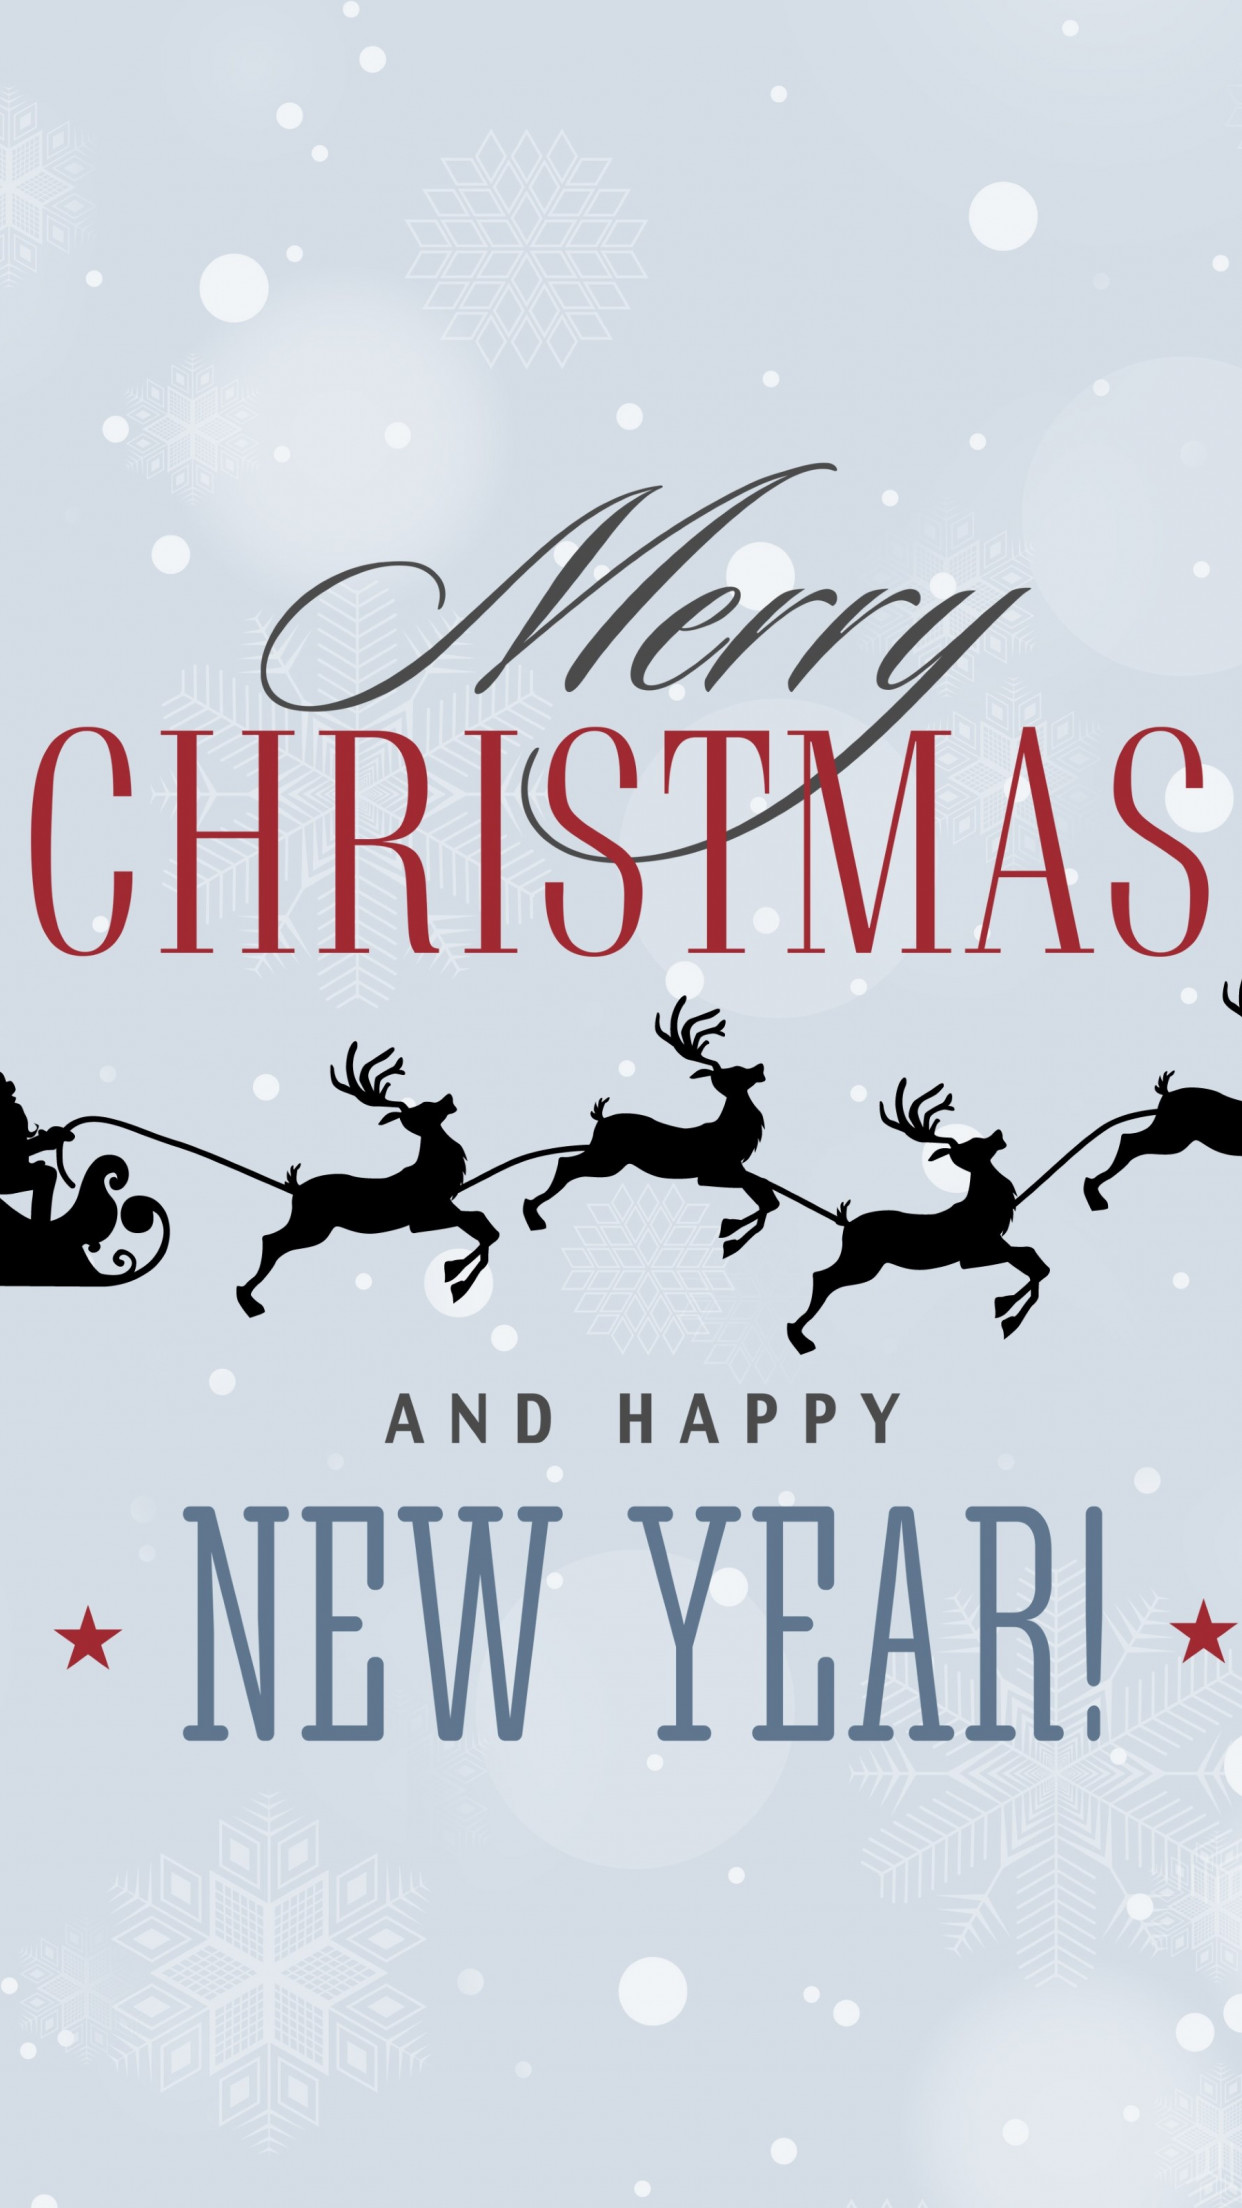 Merry Christmas and a Happy New Year wallpaper 1242x2208